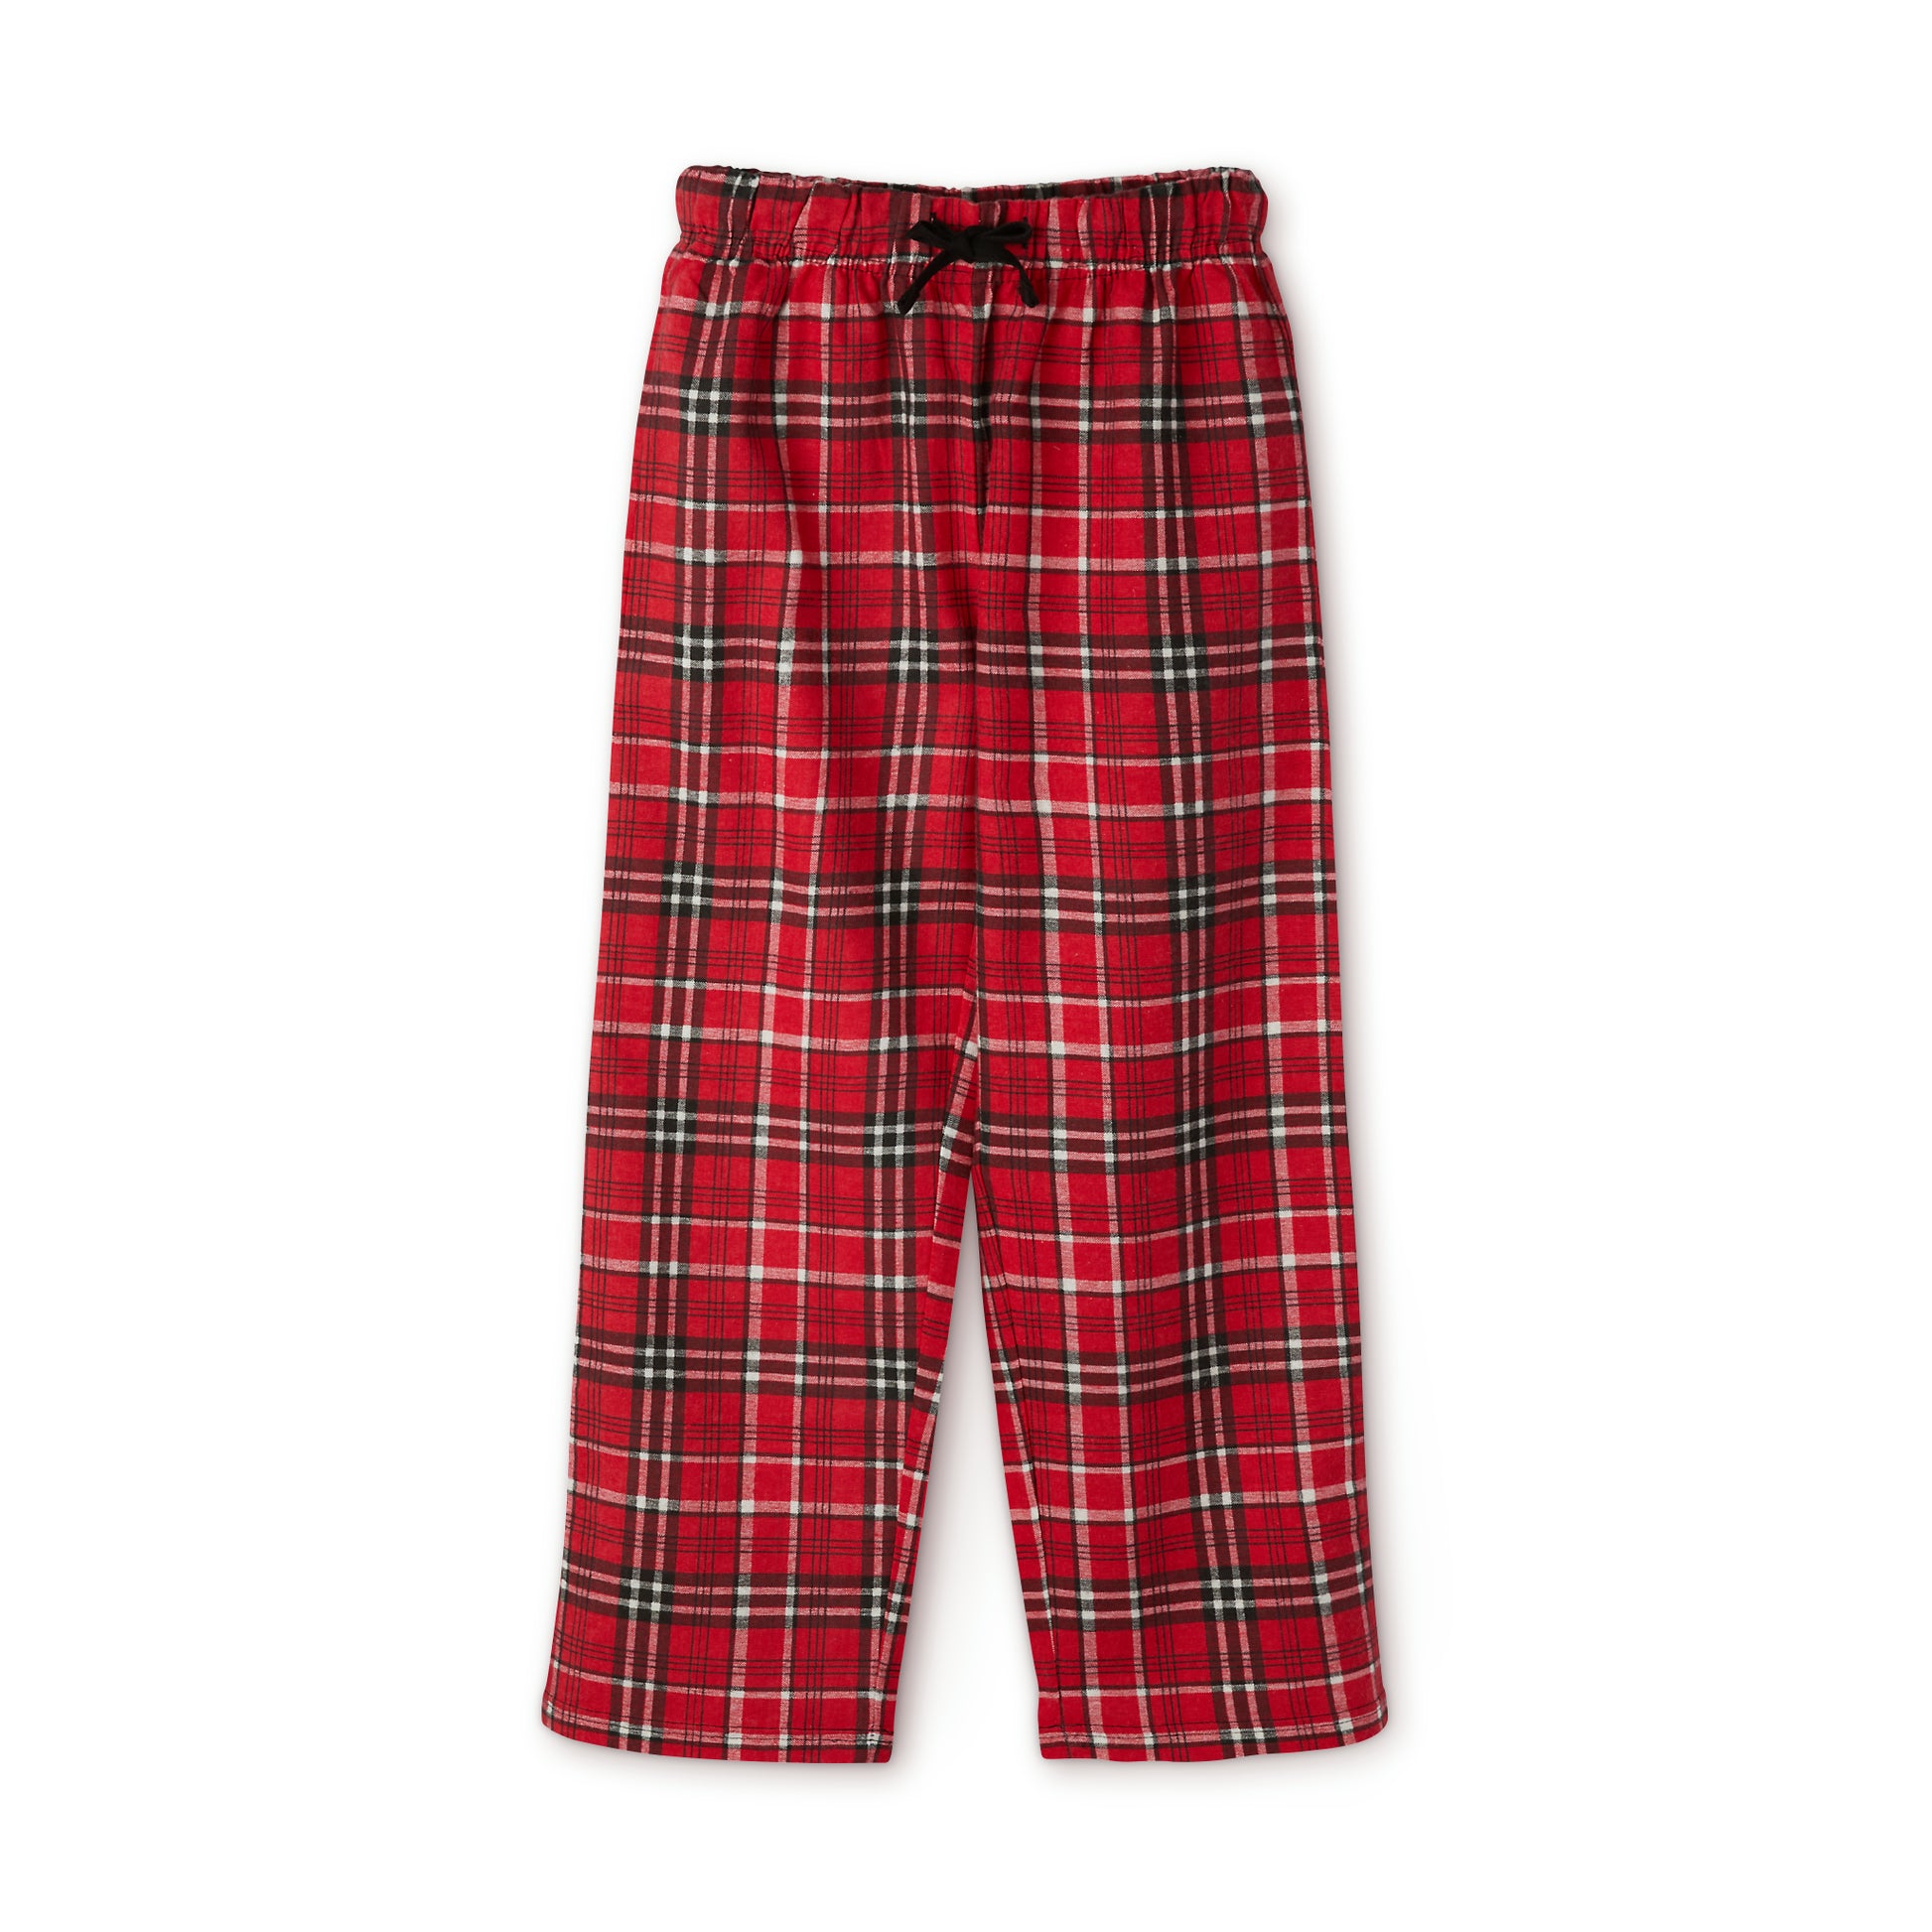 Red and black plaid pants made from 100% cotton.
Product Name: Youth Long-Sleeve Pajama-Set: 2 pc.; 4 sizes; Red Plaid
Brand Name: Printify